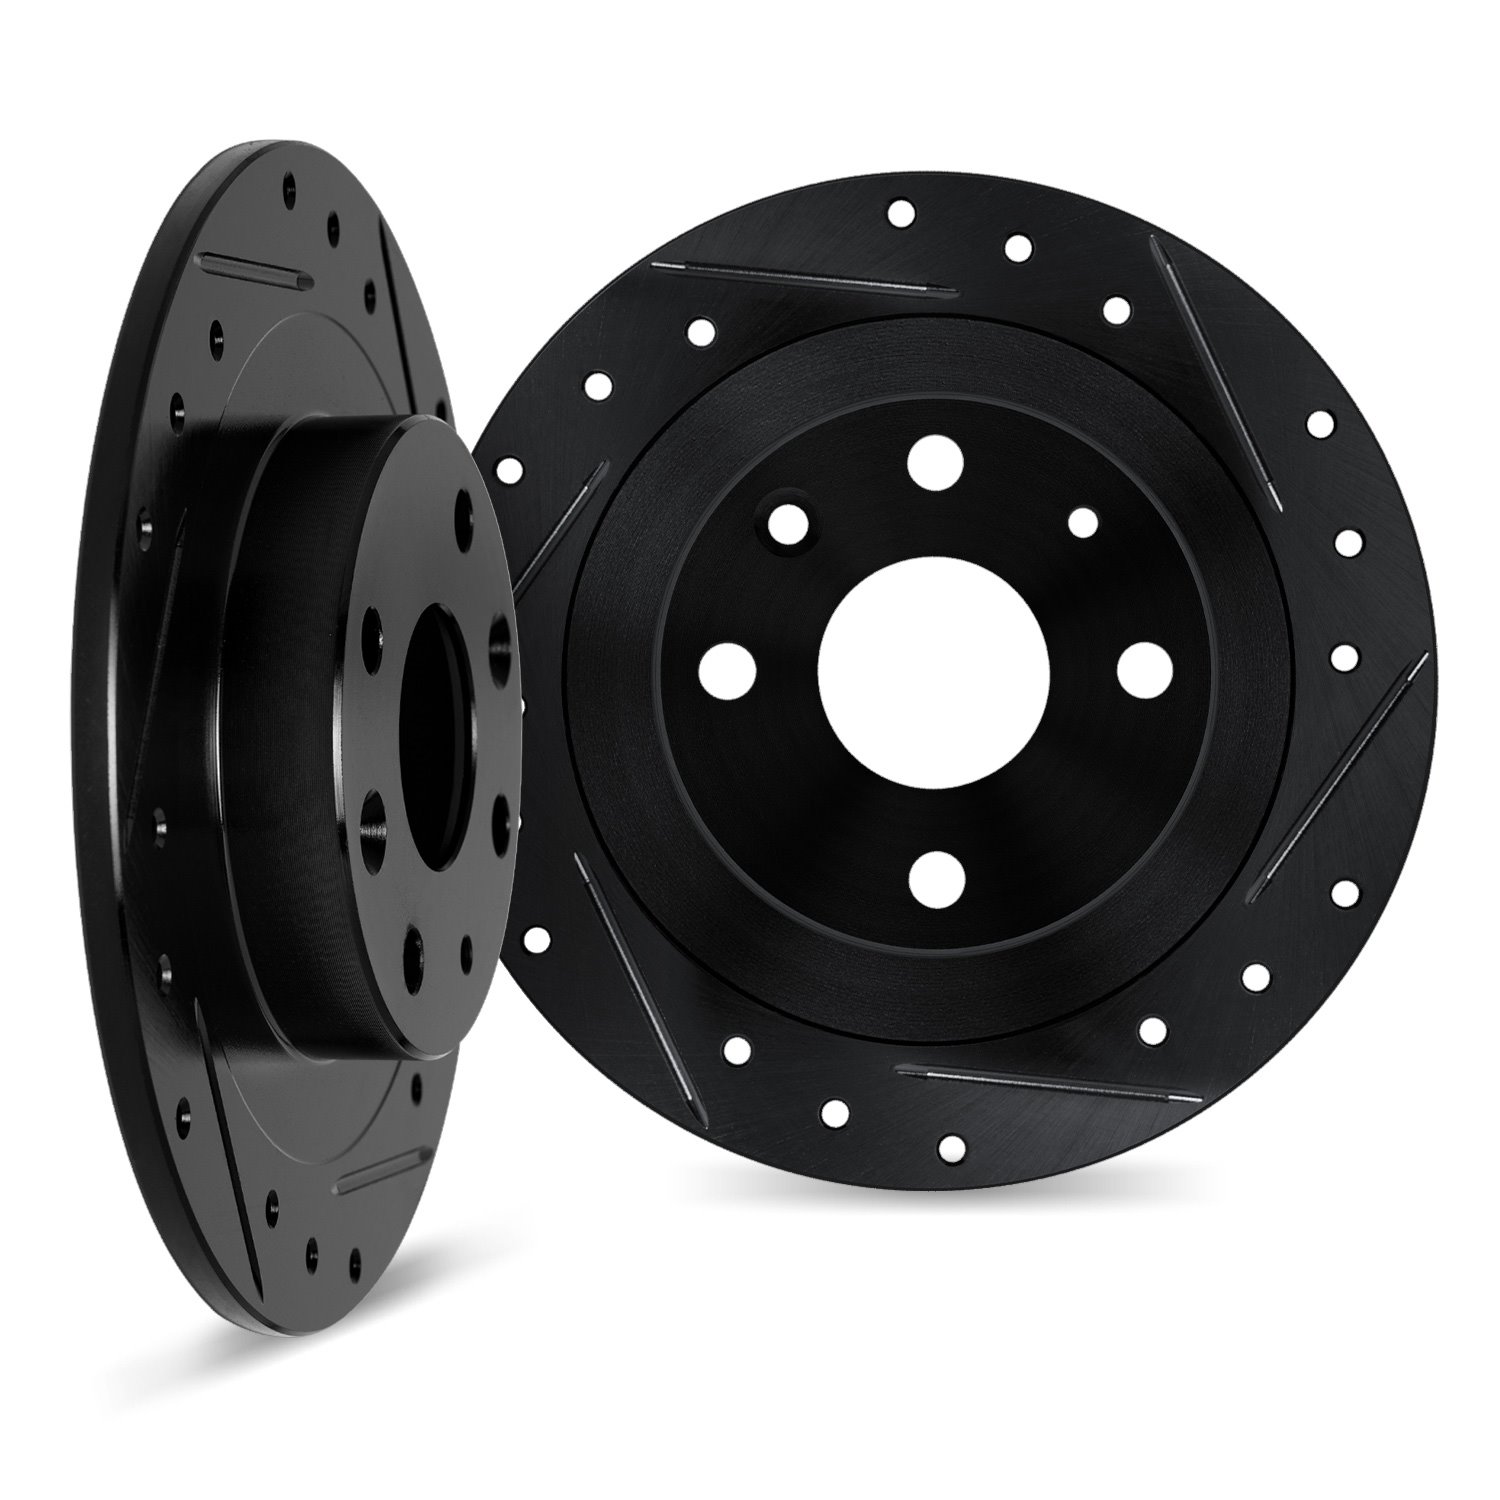 8002-54195 Drilled/Slotted Brake Rotors [Black], Fits Select Ford/Lincoln/Mercury/Mazda, Position: Rear